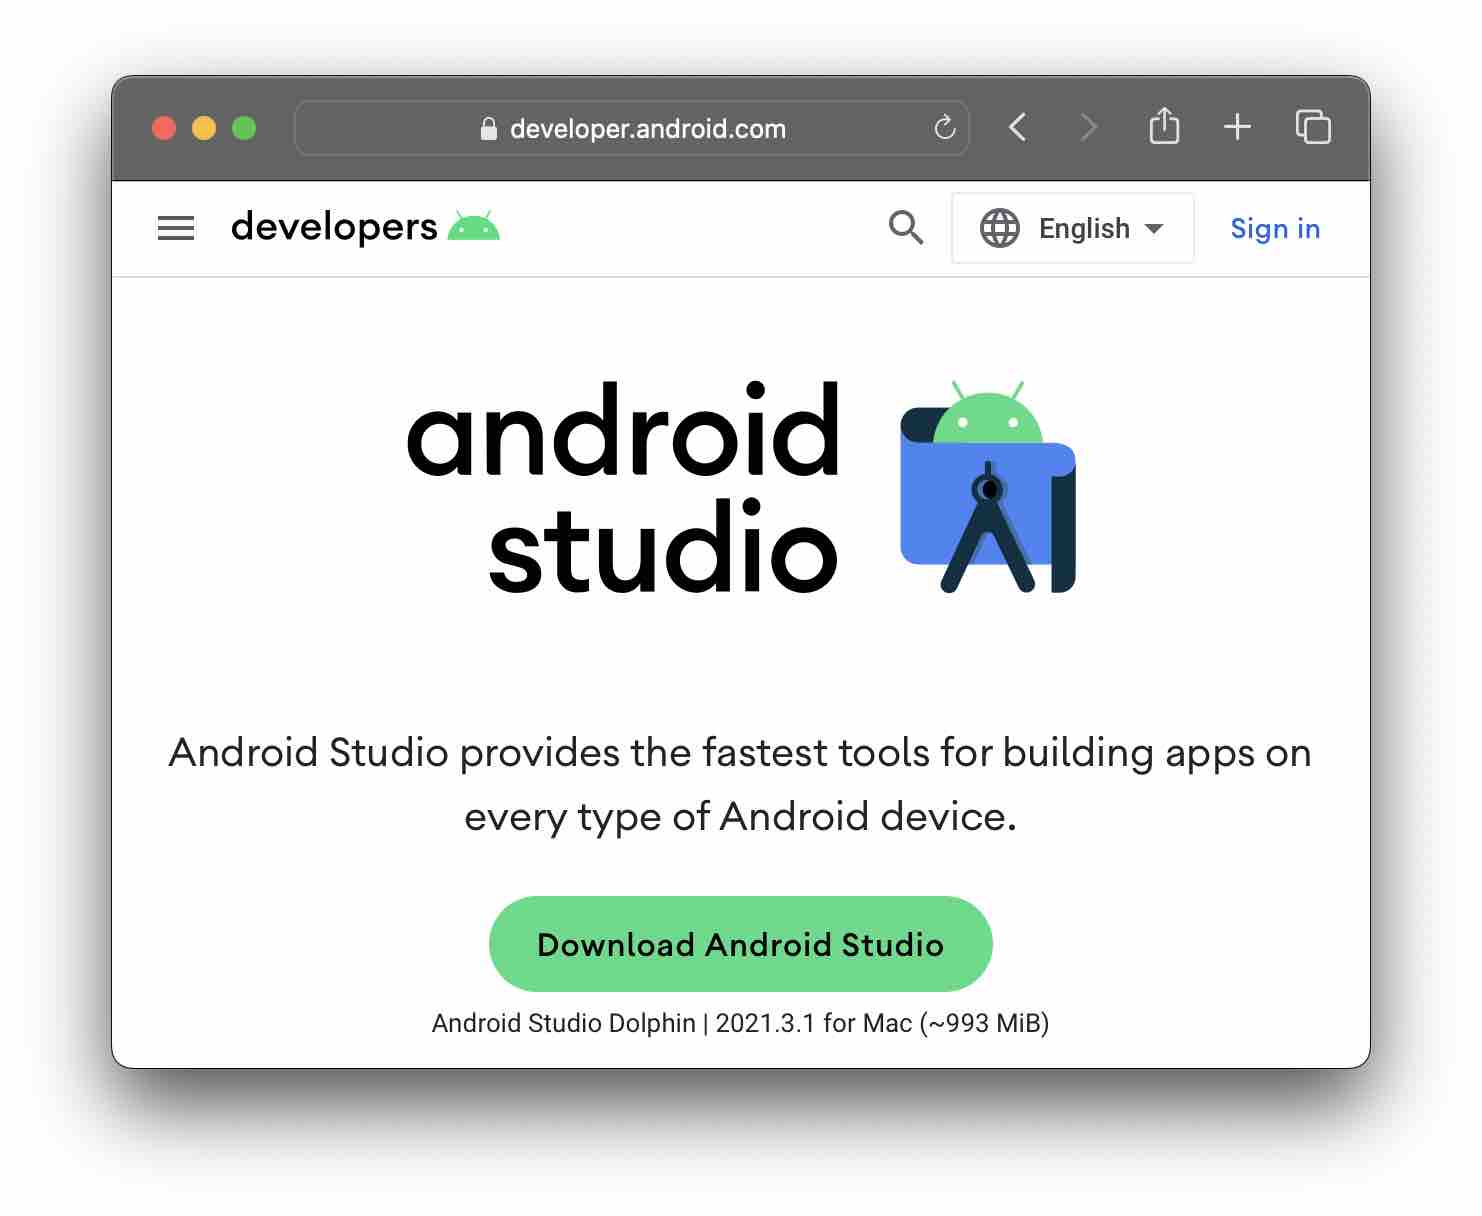 Download Android Studio Dolphin on M1-M2 Mac